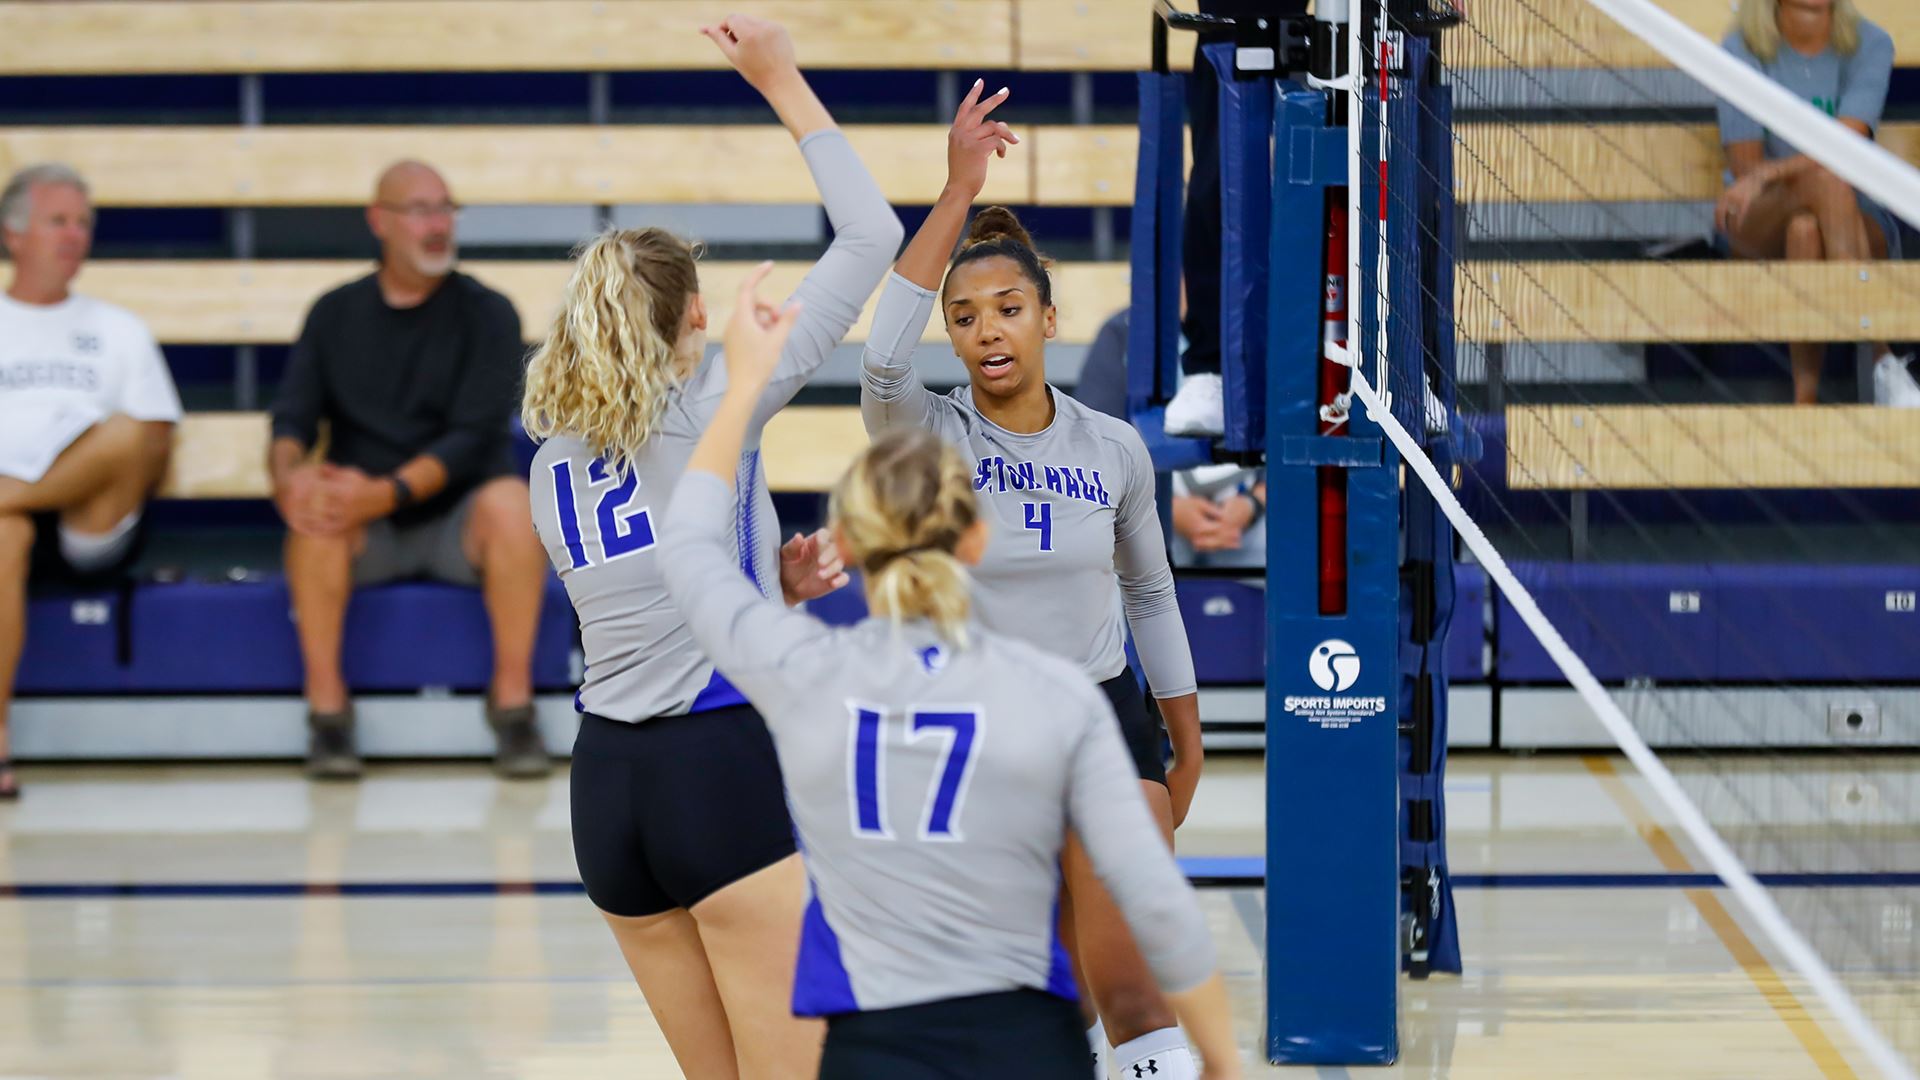 Seton Hall women's volleyball players celebrate during a match on the road.